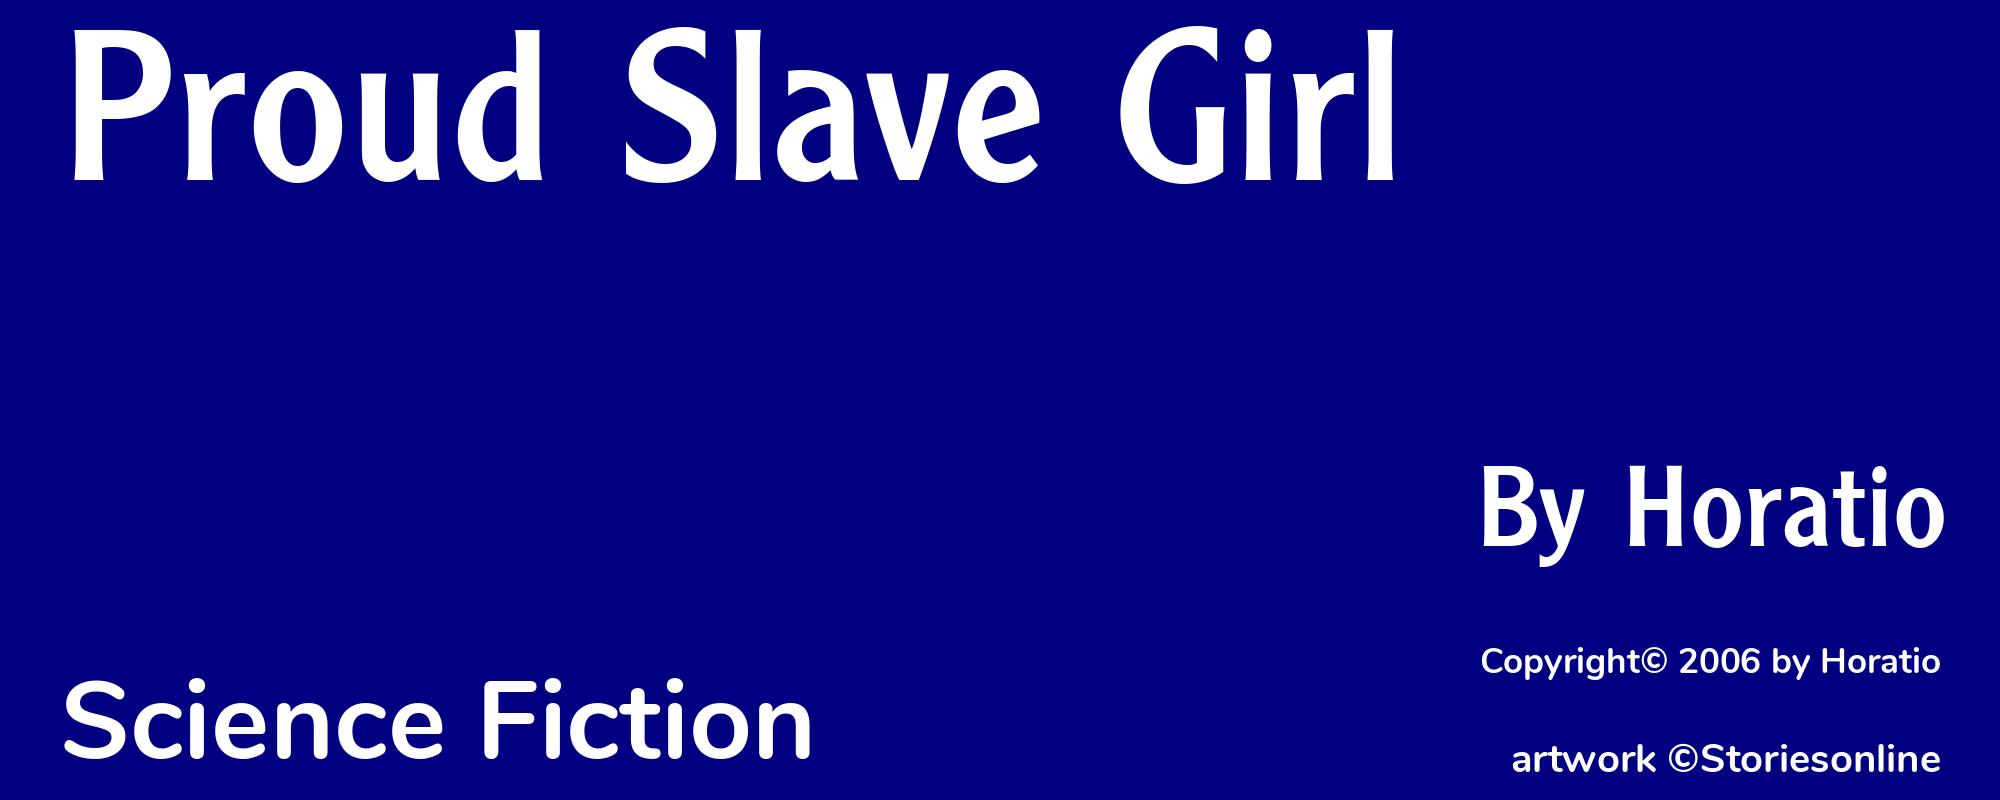 Proud Slave Girl - Cover